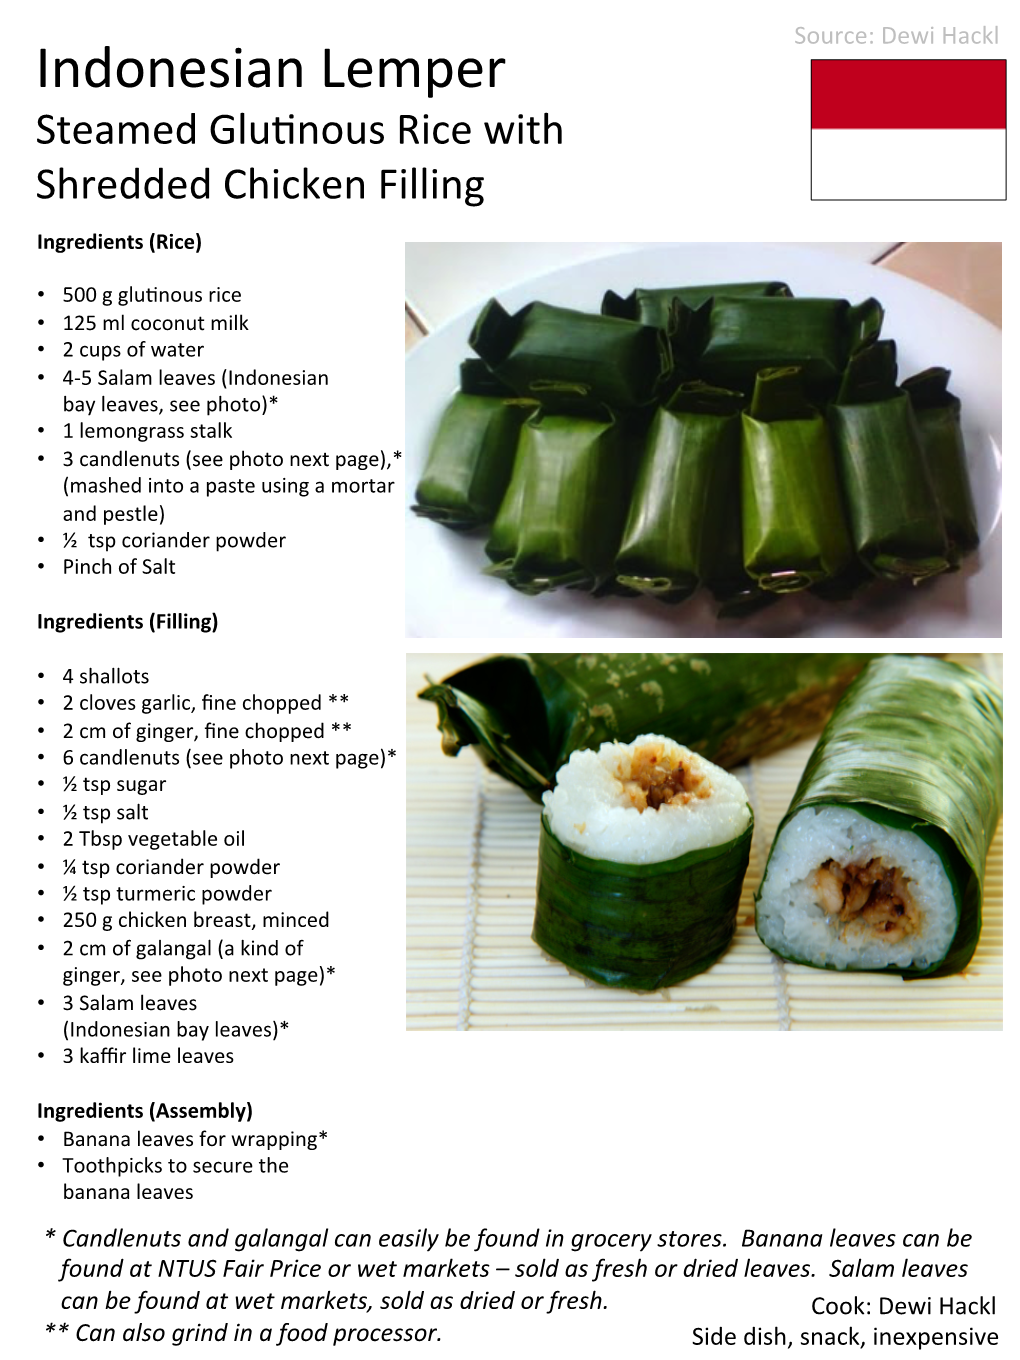 Indonesian Lemper Steamed Glu�Nous Rice with Shredded Chicken Filling Ingredients (Rice)